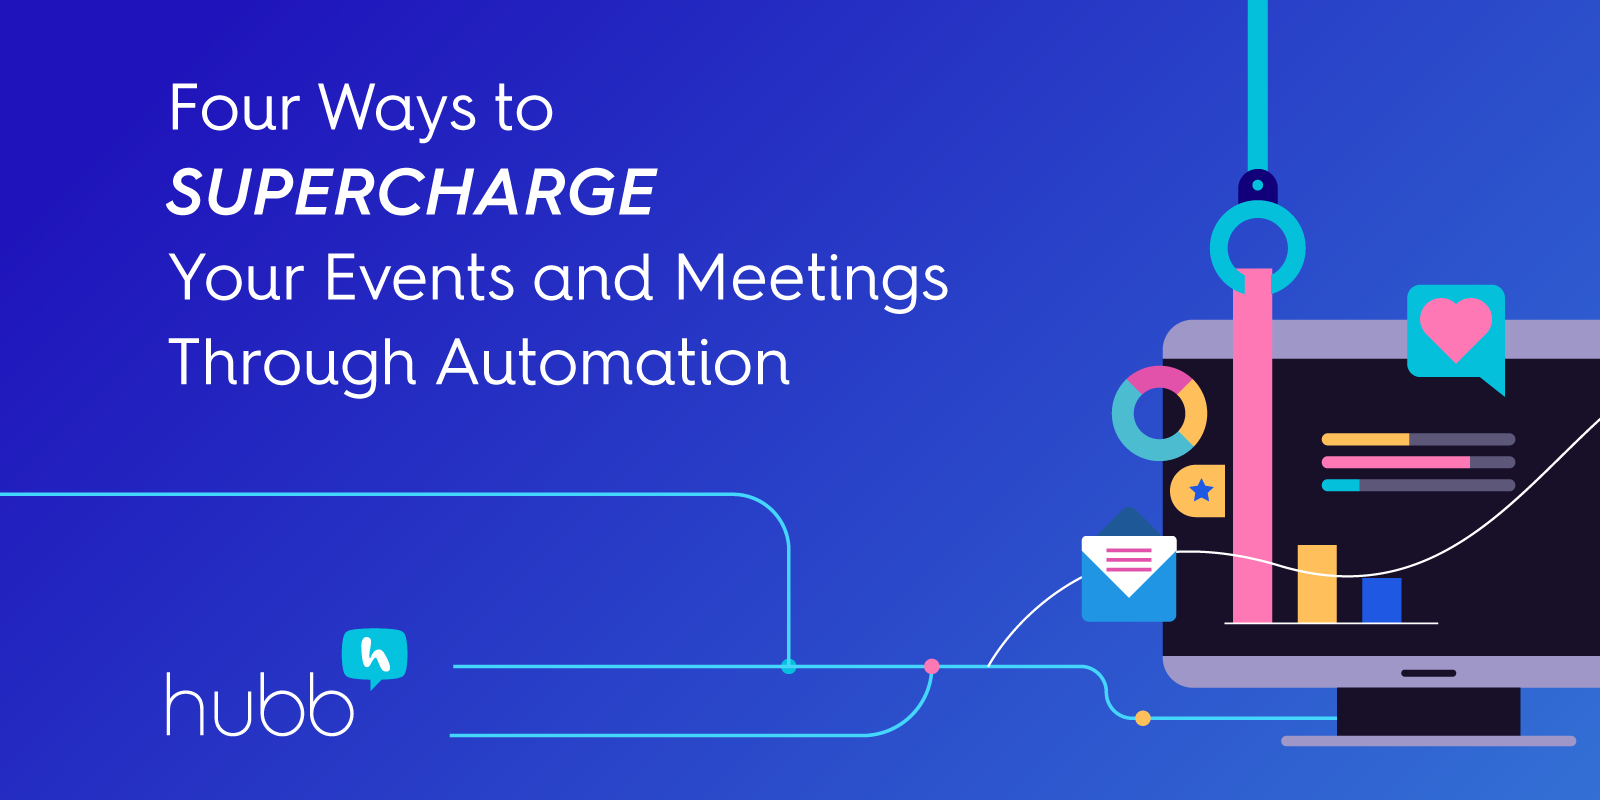 SuperchargeEvent-through-Automation-Social